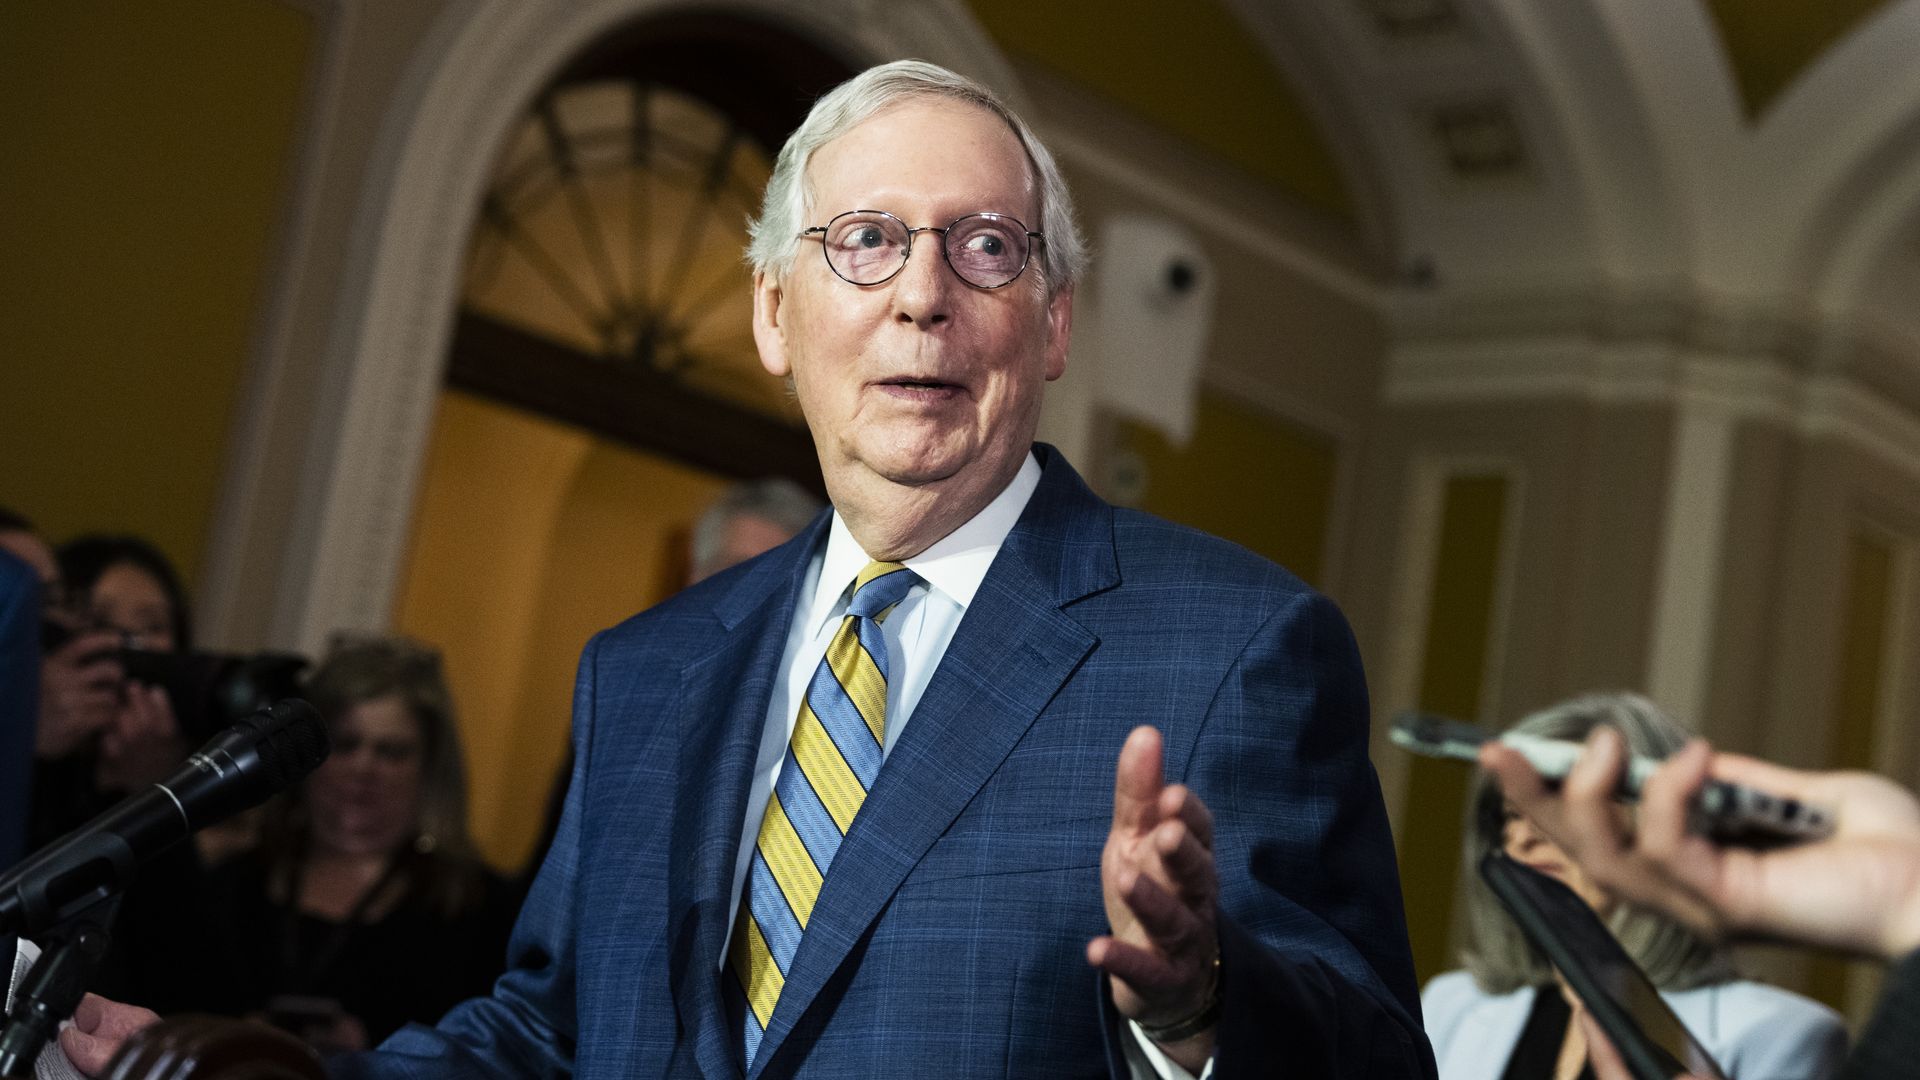 Senate Majority Leader Mitch McConnell, wearing a light blue suit, white shirt, blue-and-yellow striped tie and glasses, speaks to reporters at the Capitol.